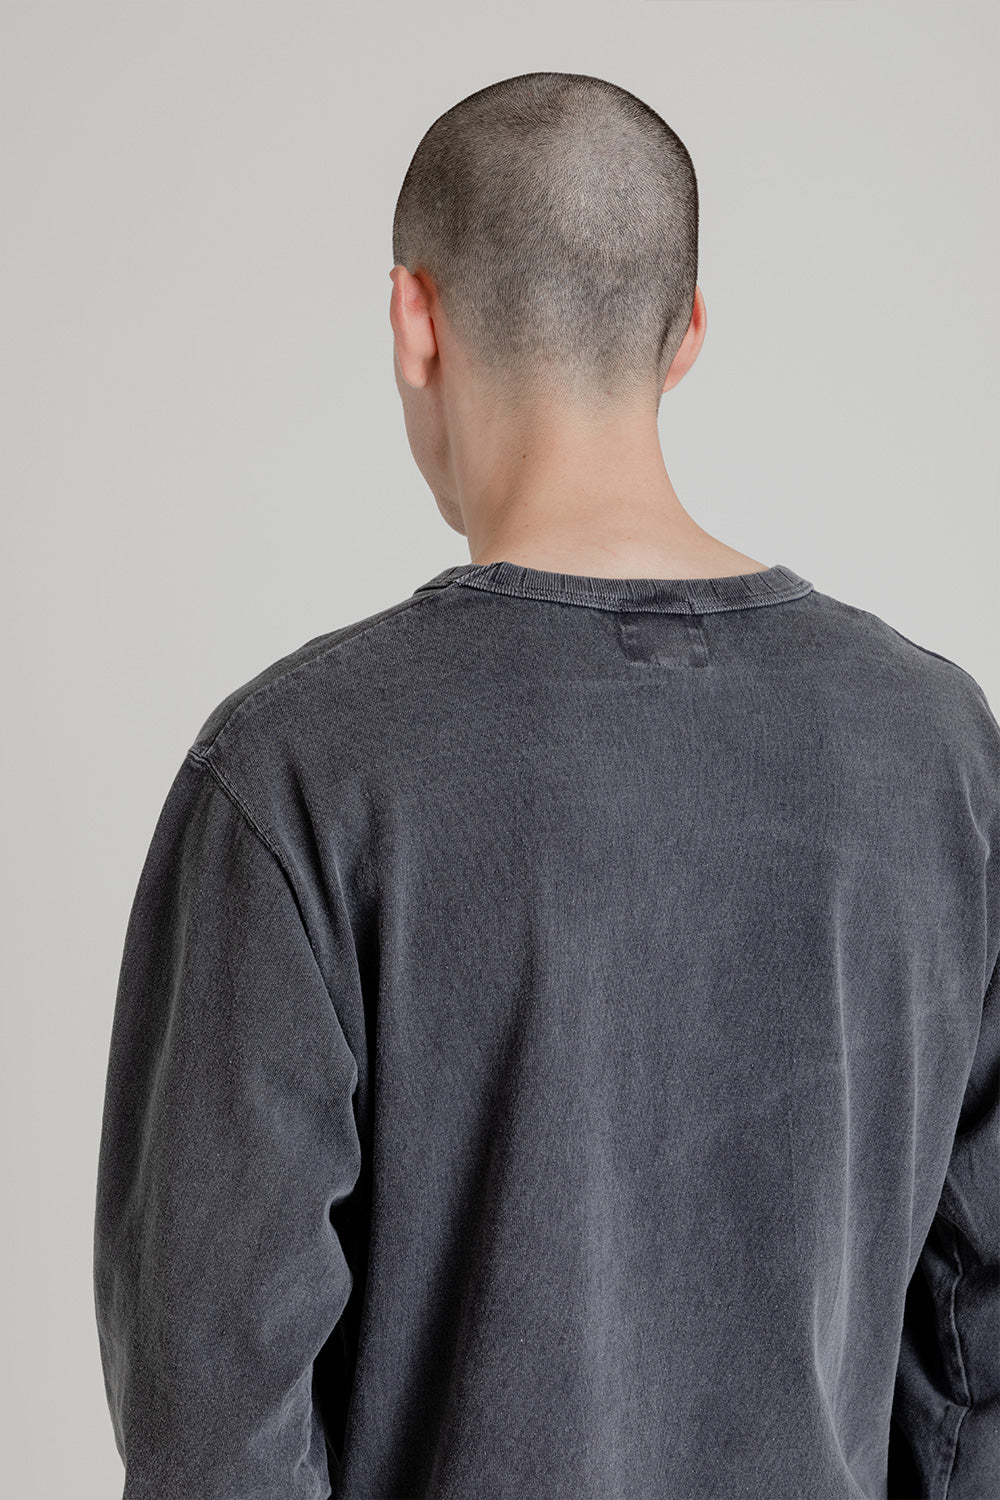 Jackman Pigment Dyed Ribbed L/S T-Shirt in Dark Grey